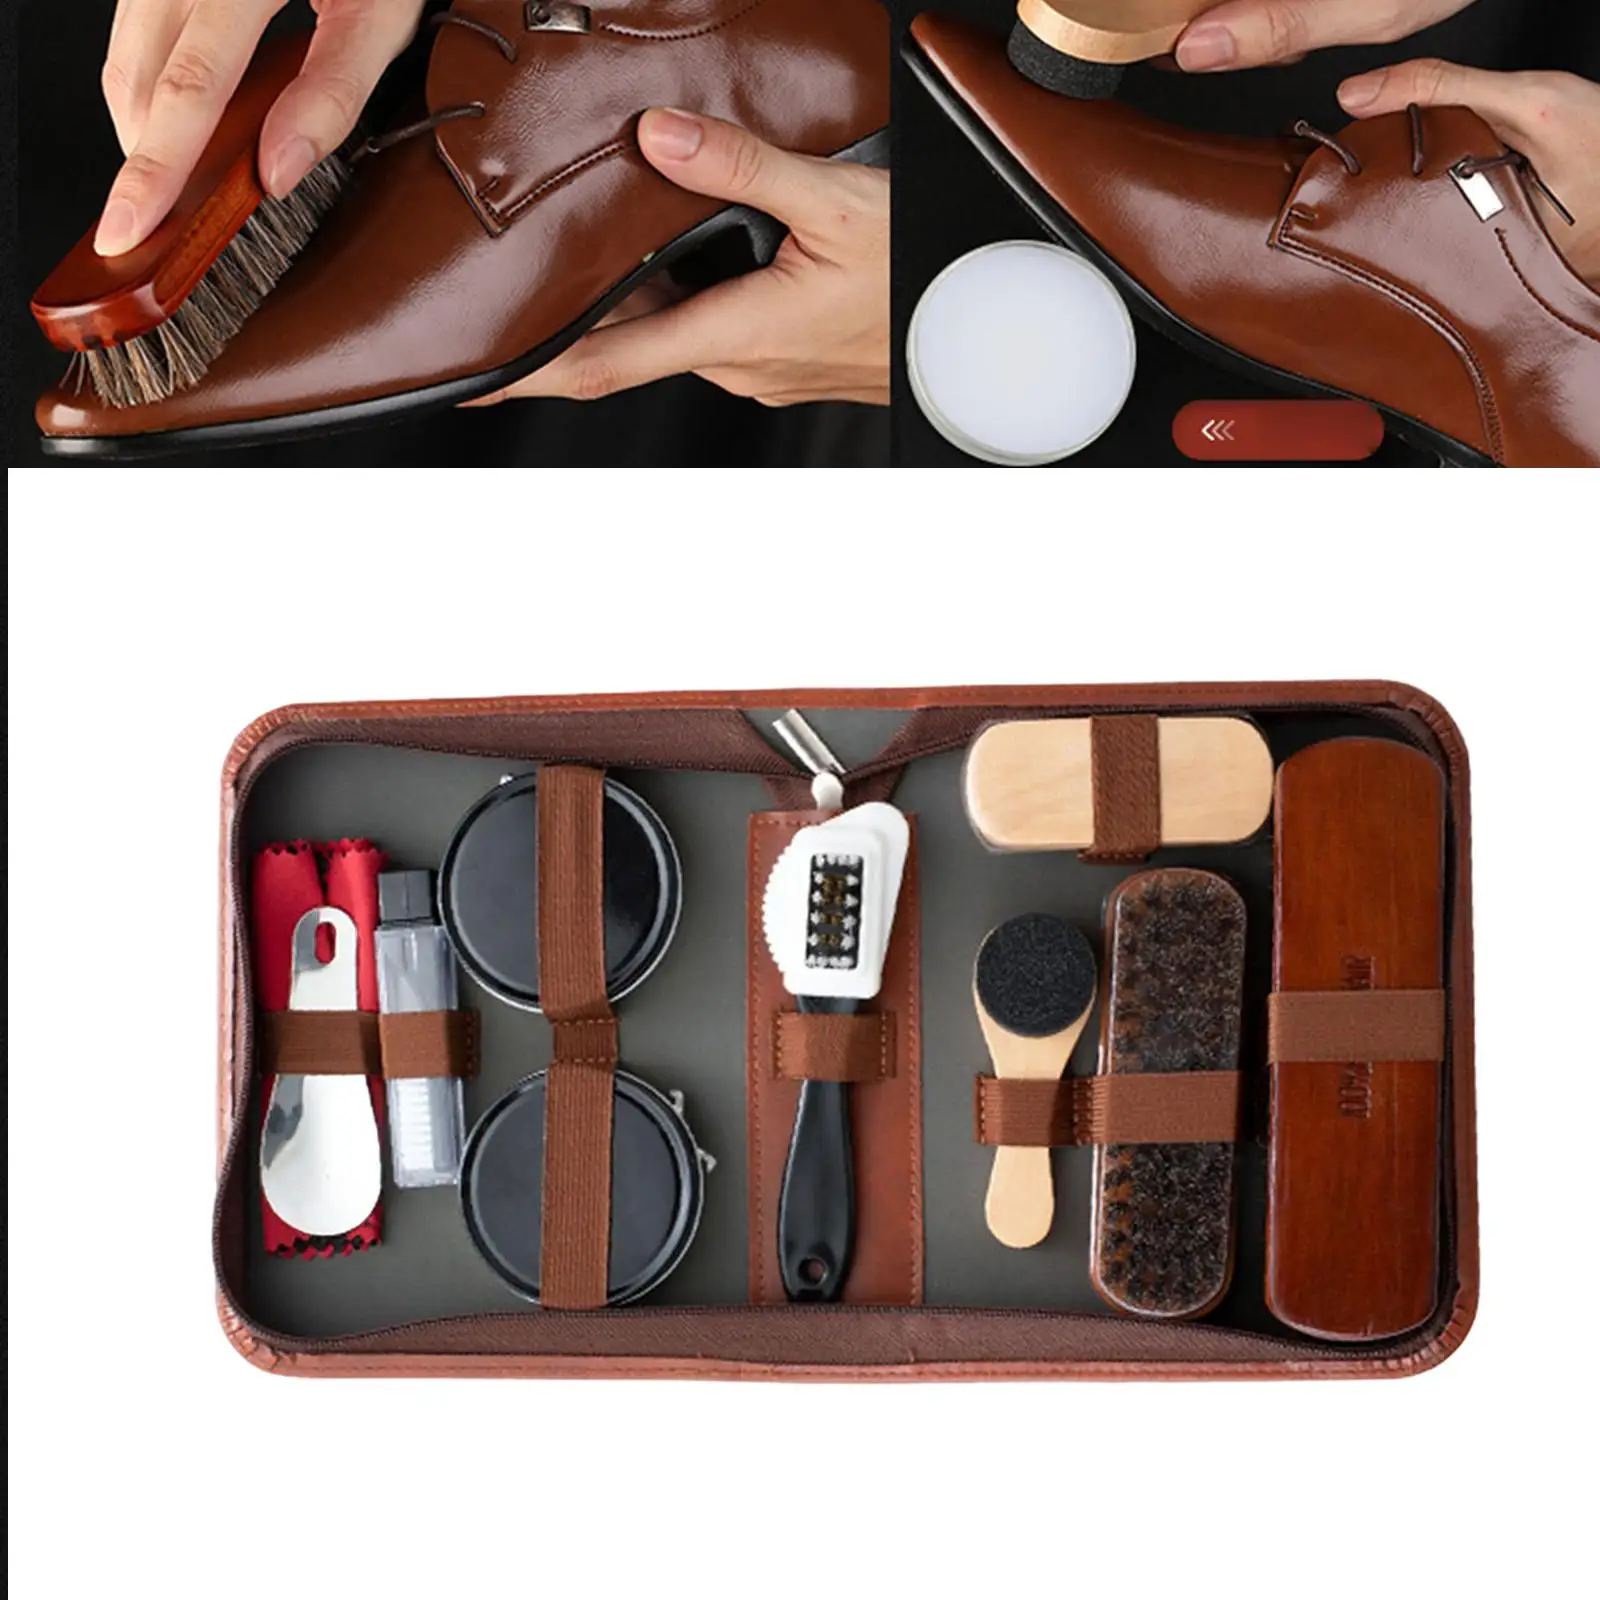 11Pcs/Set Shoes Shine Set Portable For Boots Sneakers Cleaning Set Brush Shine Polishing Tool For Leather Shoes